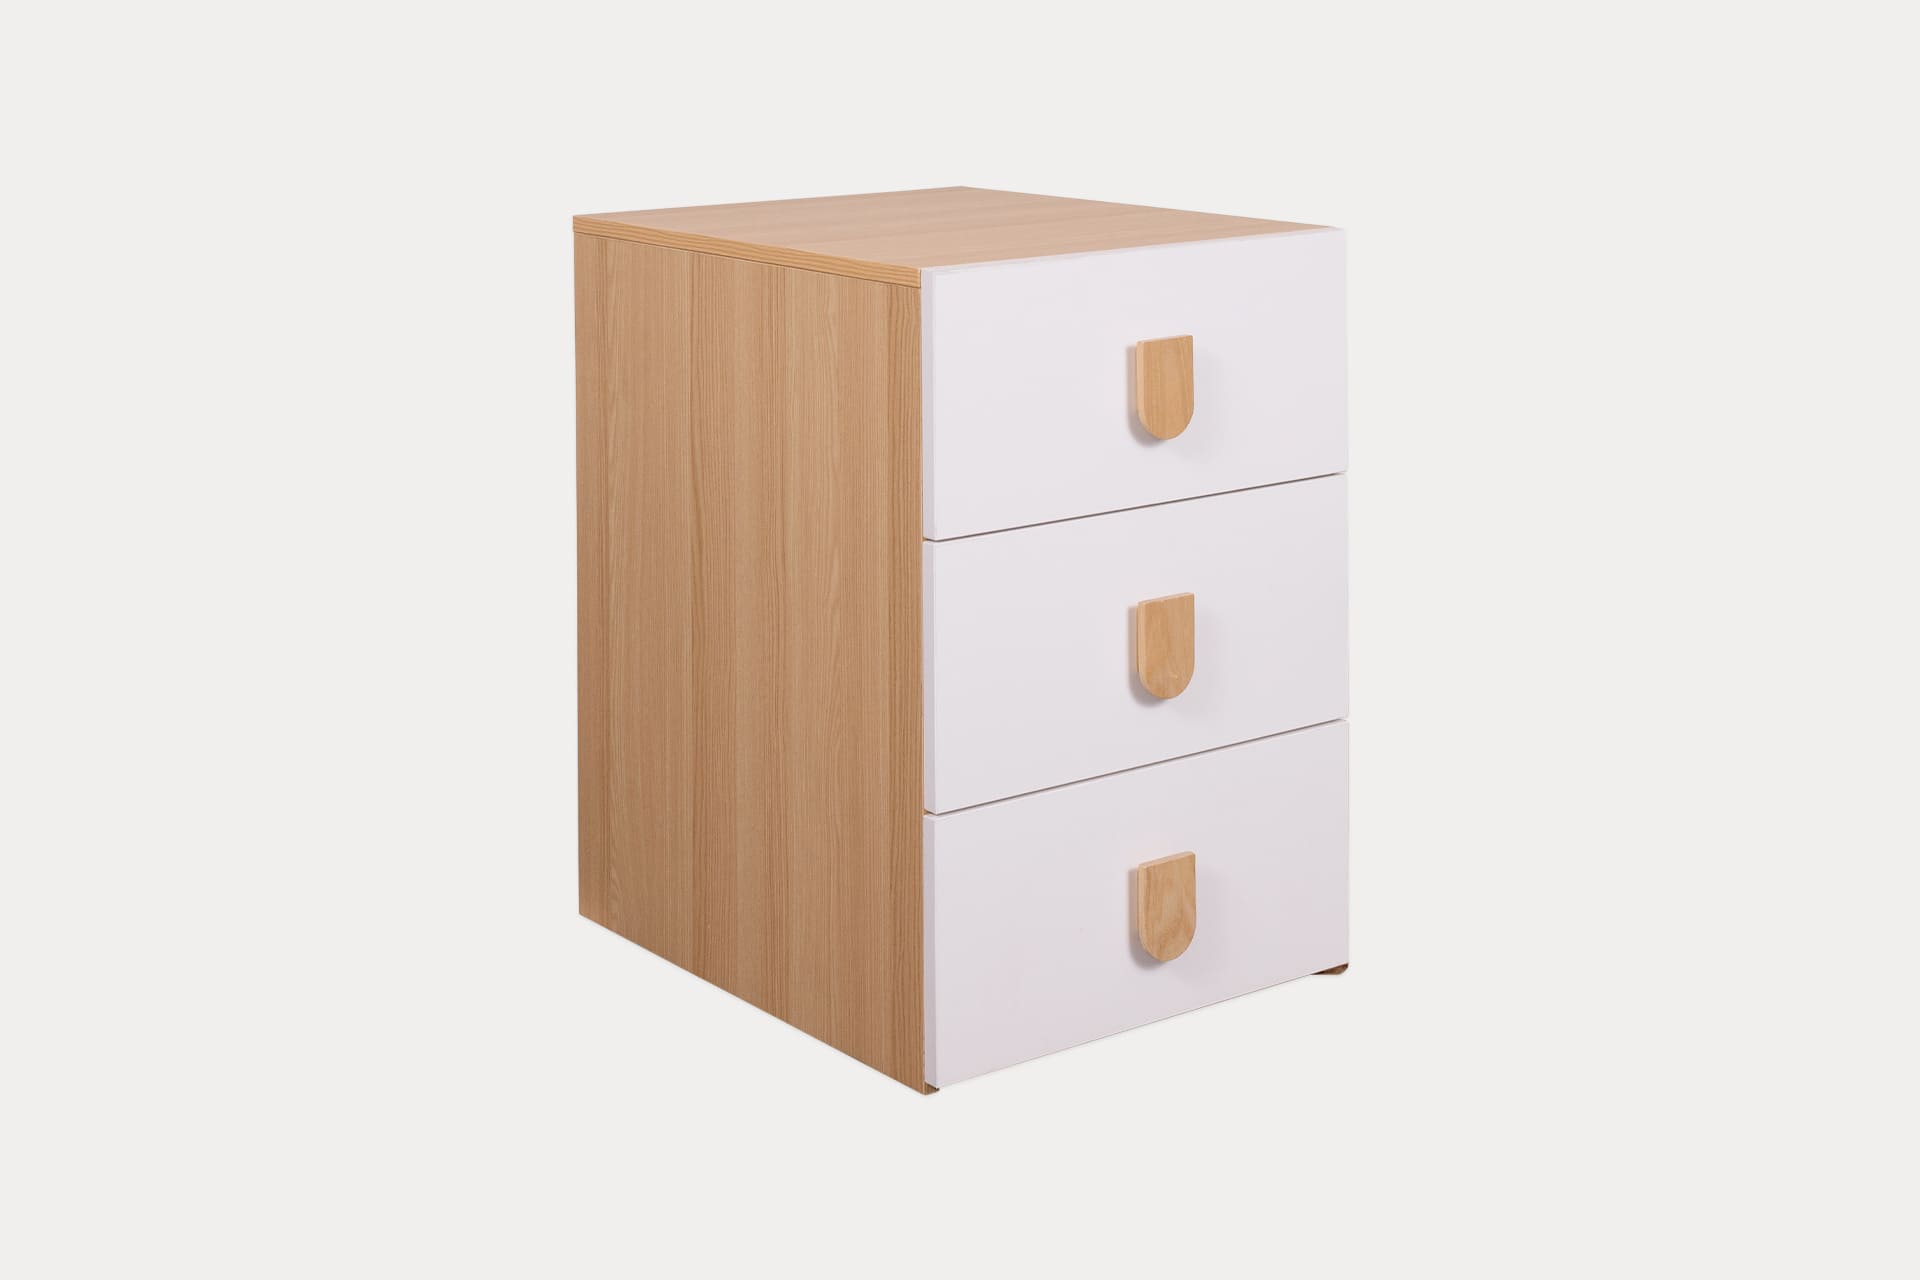 Wooden Chest of 3 Drawers (W51 x D72 x H75cm) was $1,680